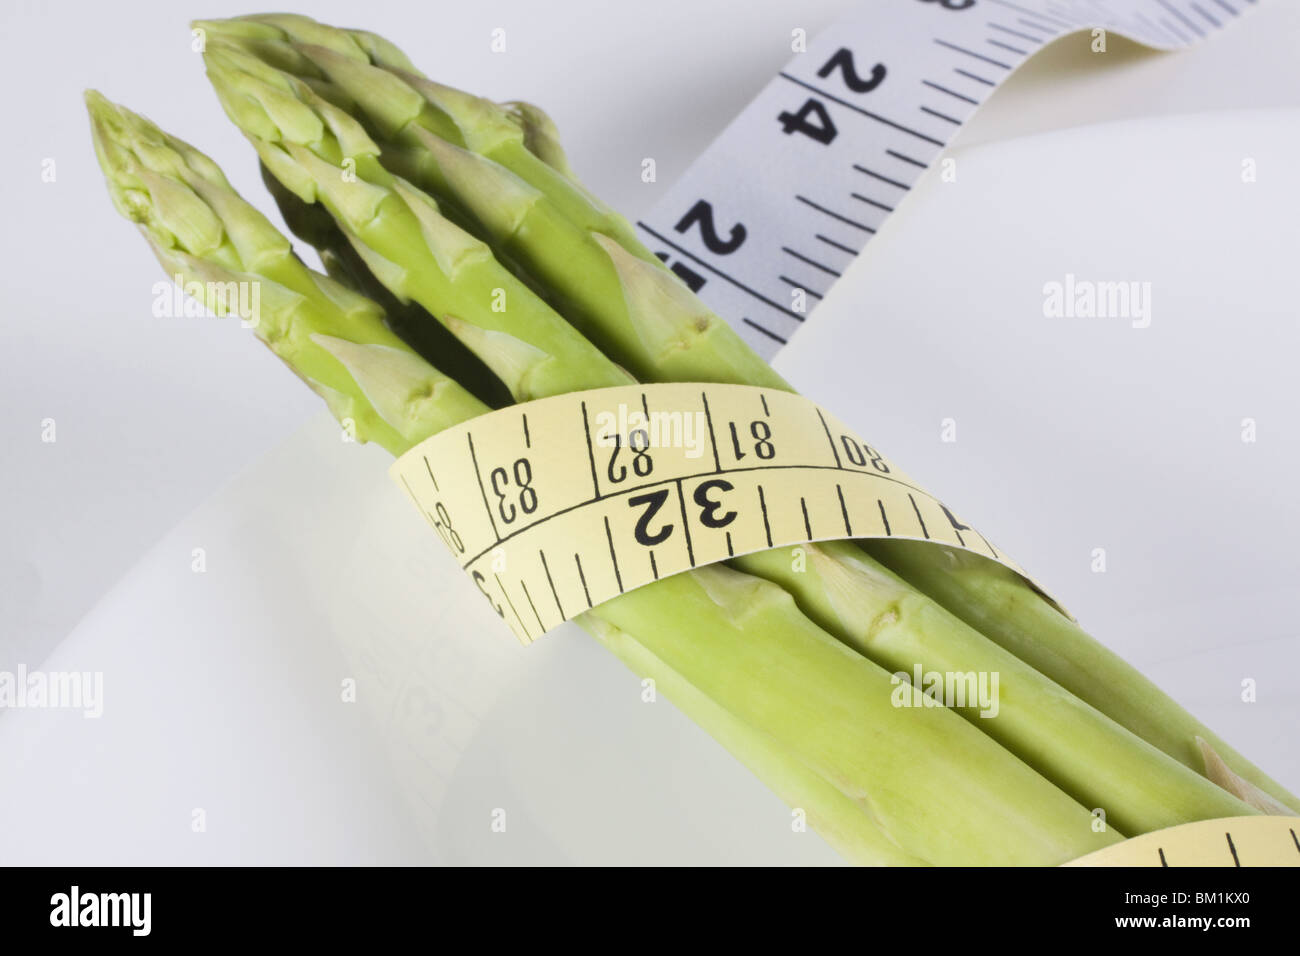 Close-up of a tape measure wrapped around asparagus stalks Stock Photo